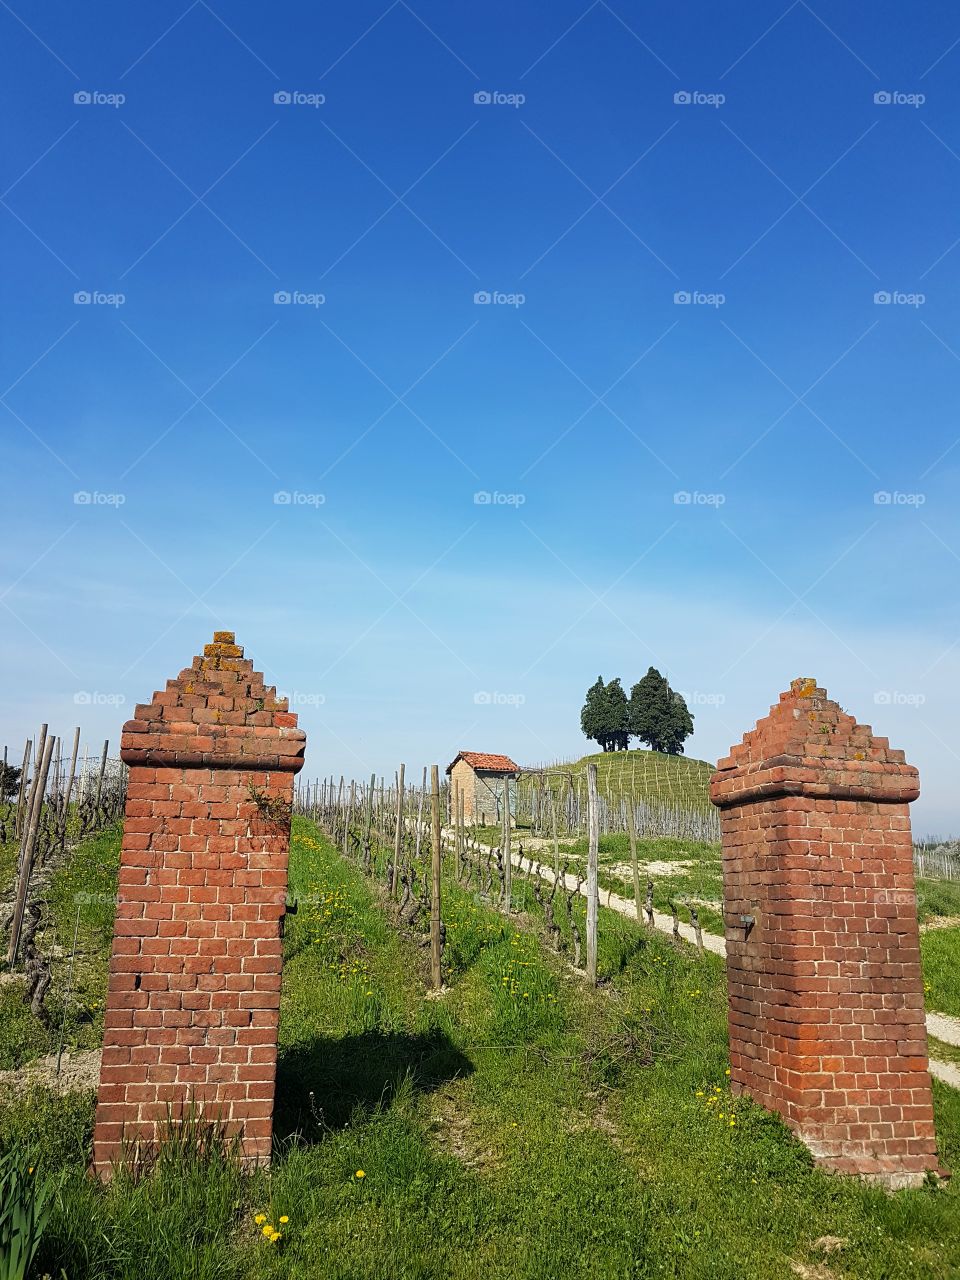 Ancient brick columns in a vineyard in a sunny day in springtime